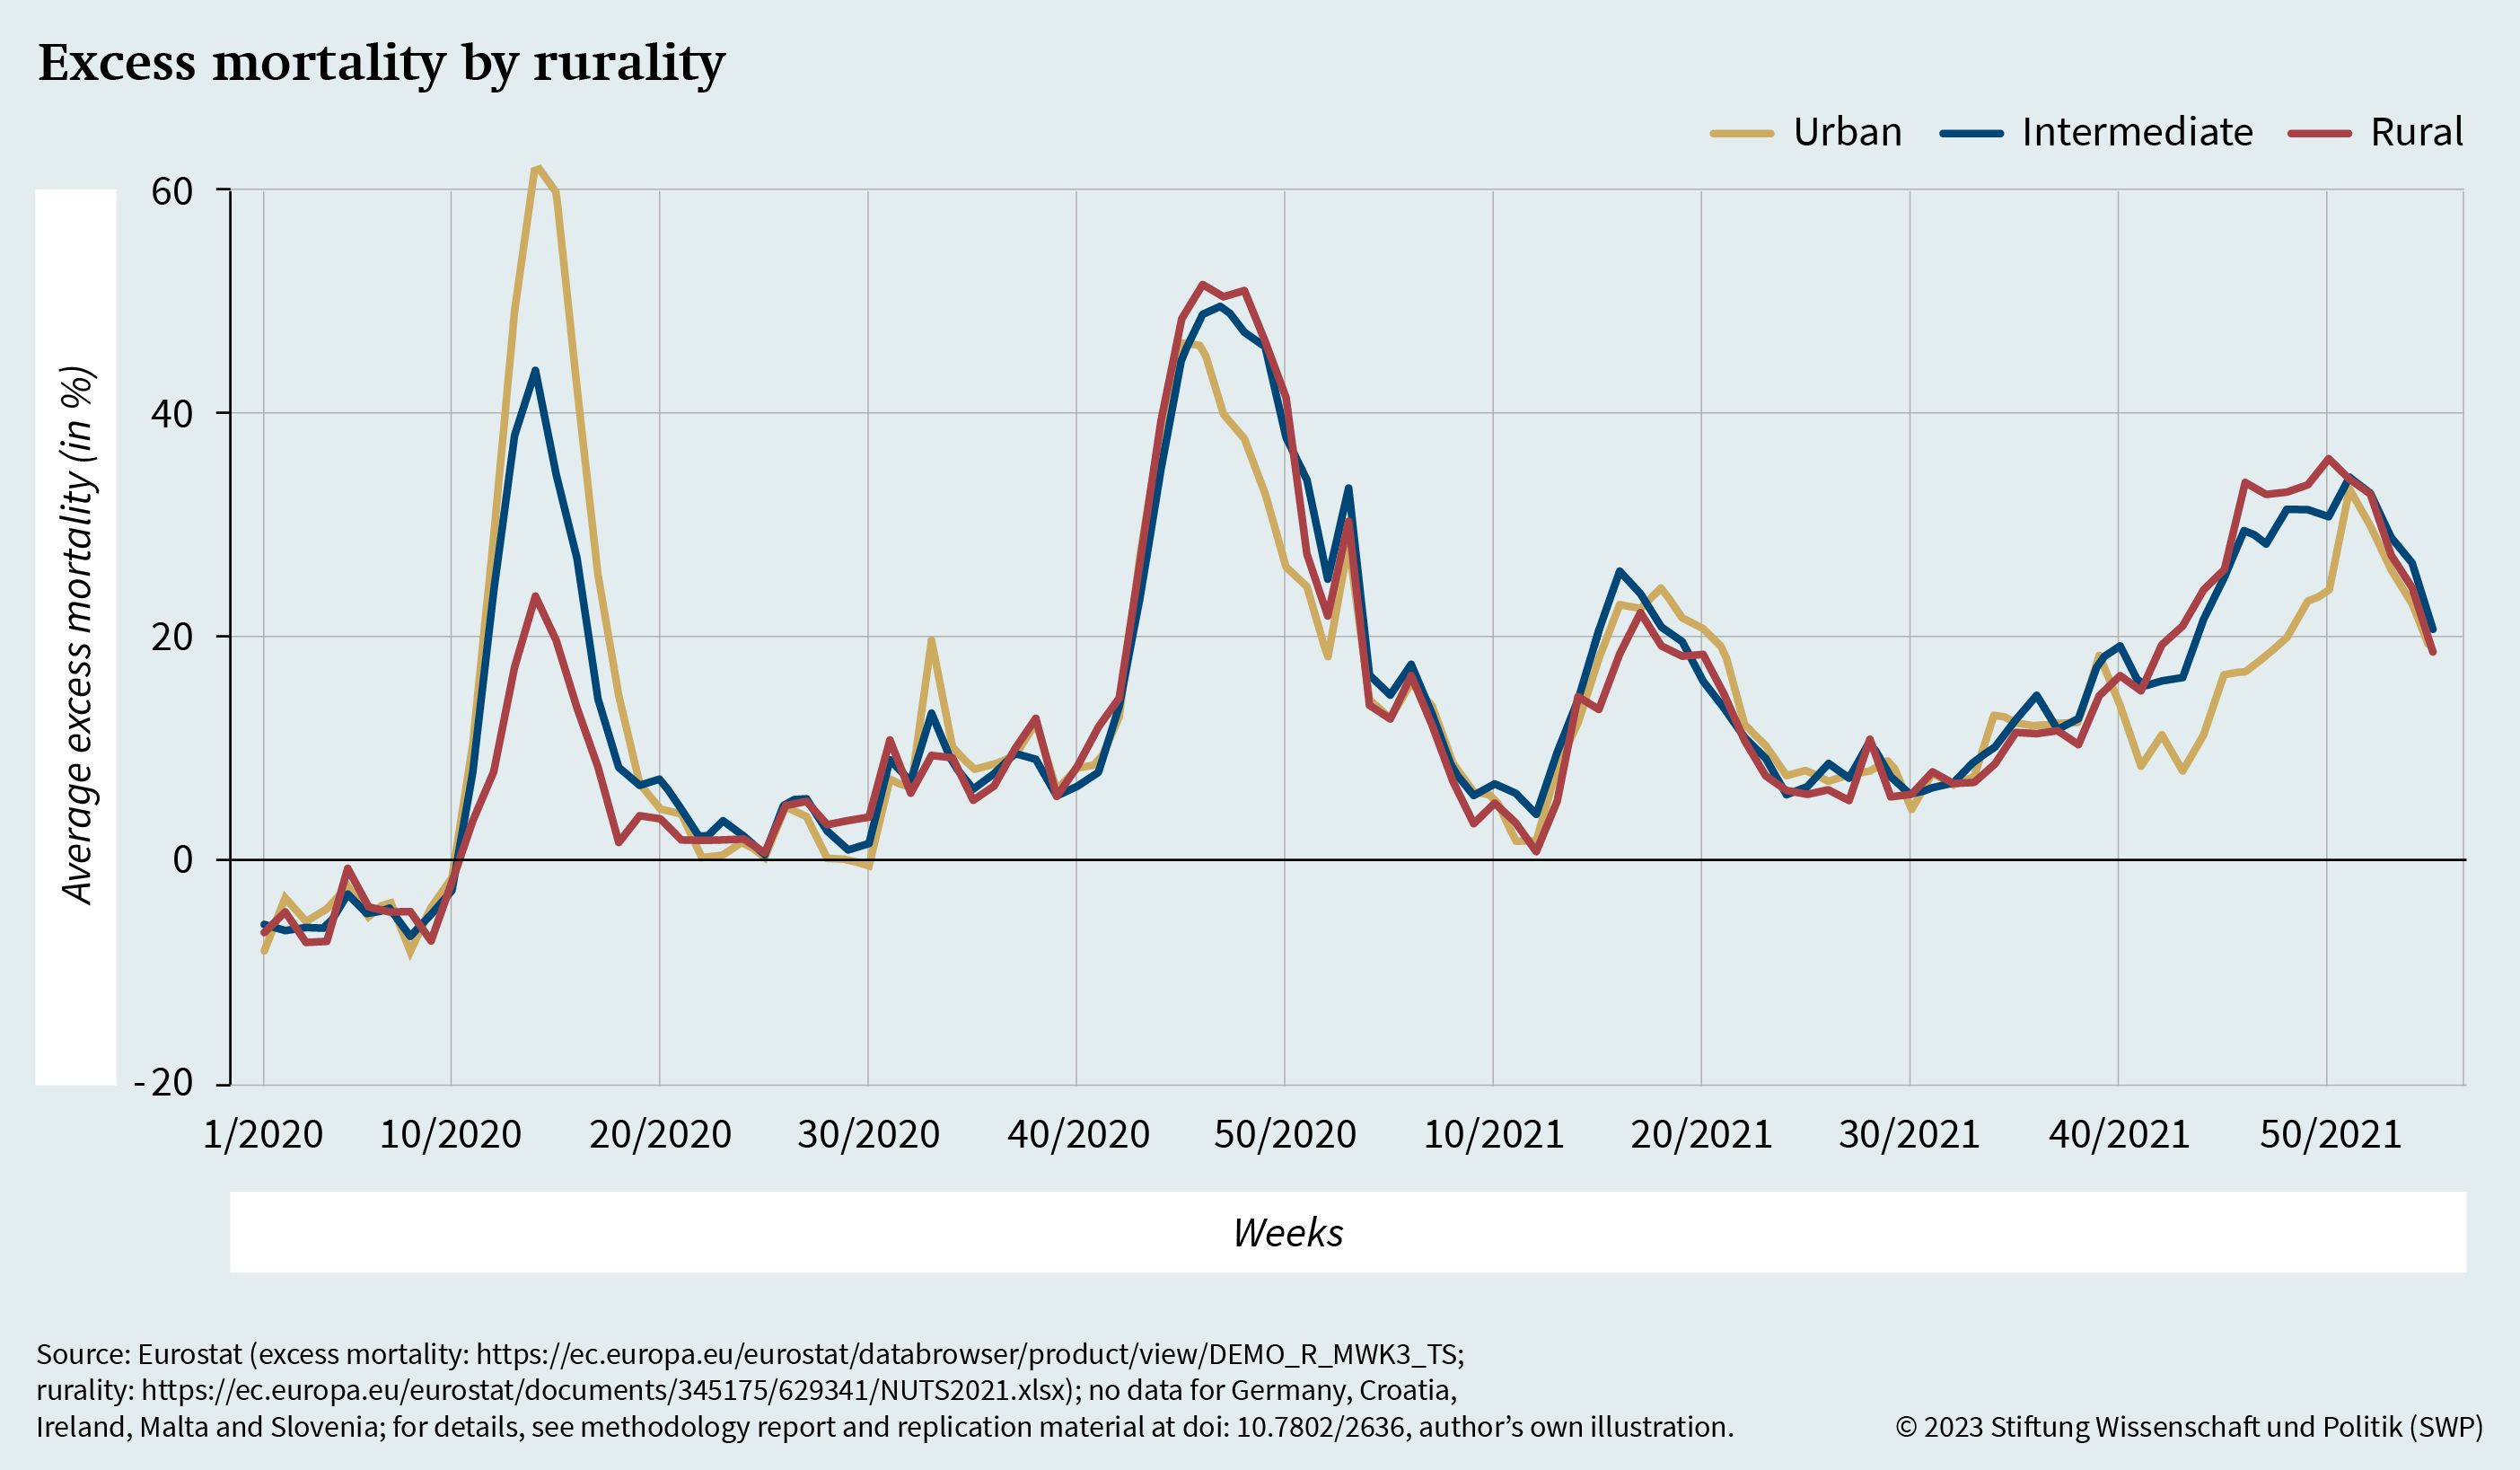 Figure 2: Excess mortality by rurality